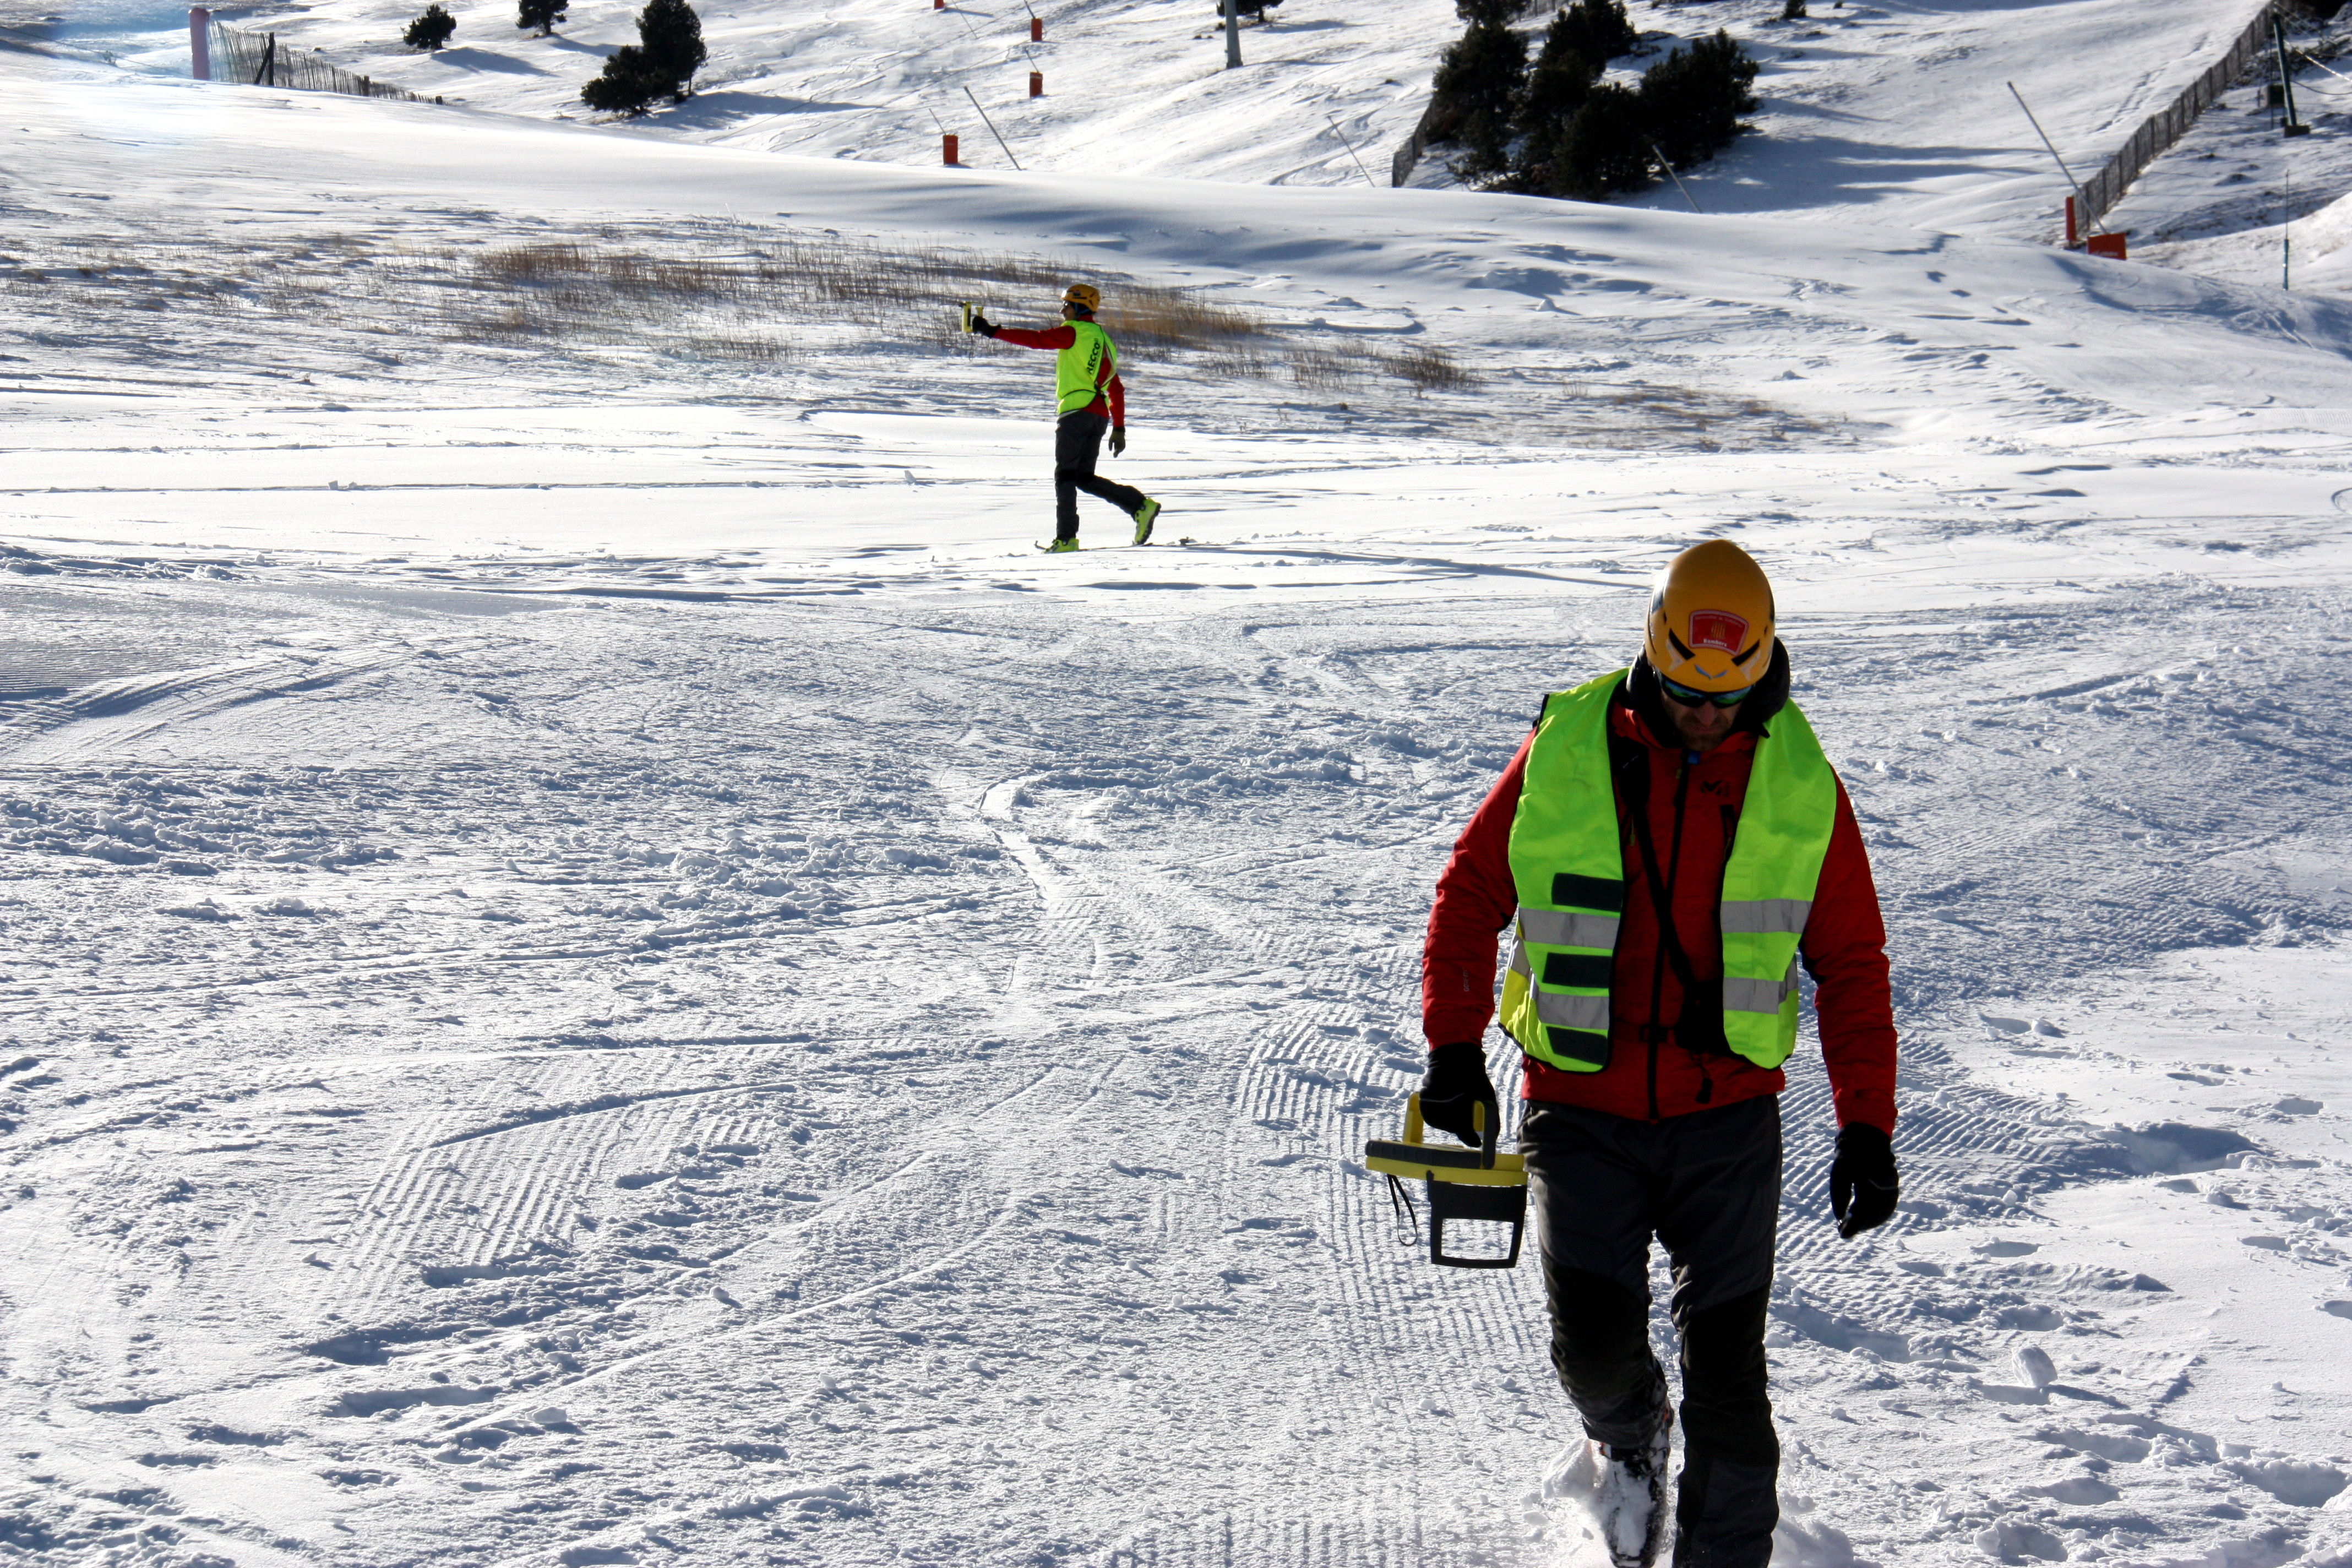 Firefighters using avalanche victim detection equipment